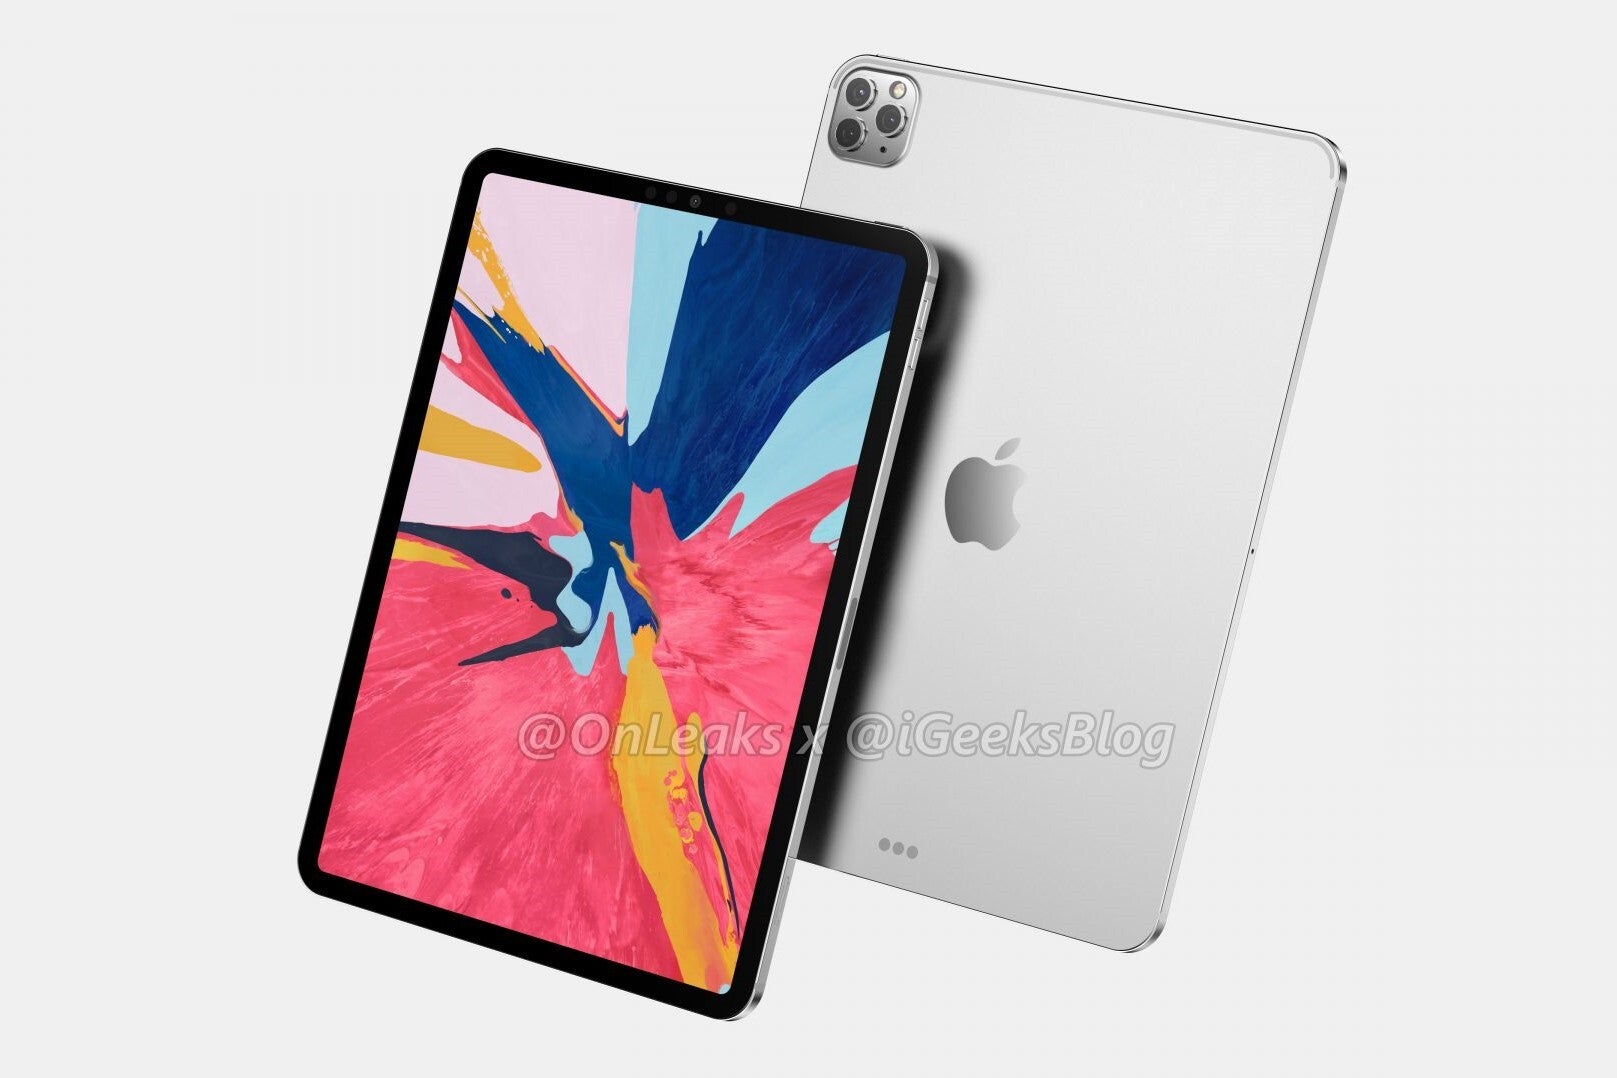  2020 iPad Pro CAD-based render - Apple's first 5G iPad Pro could arrive as early as this year